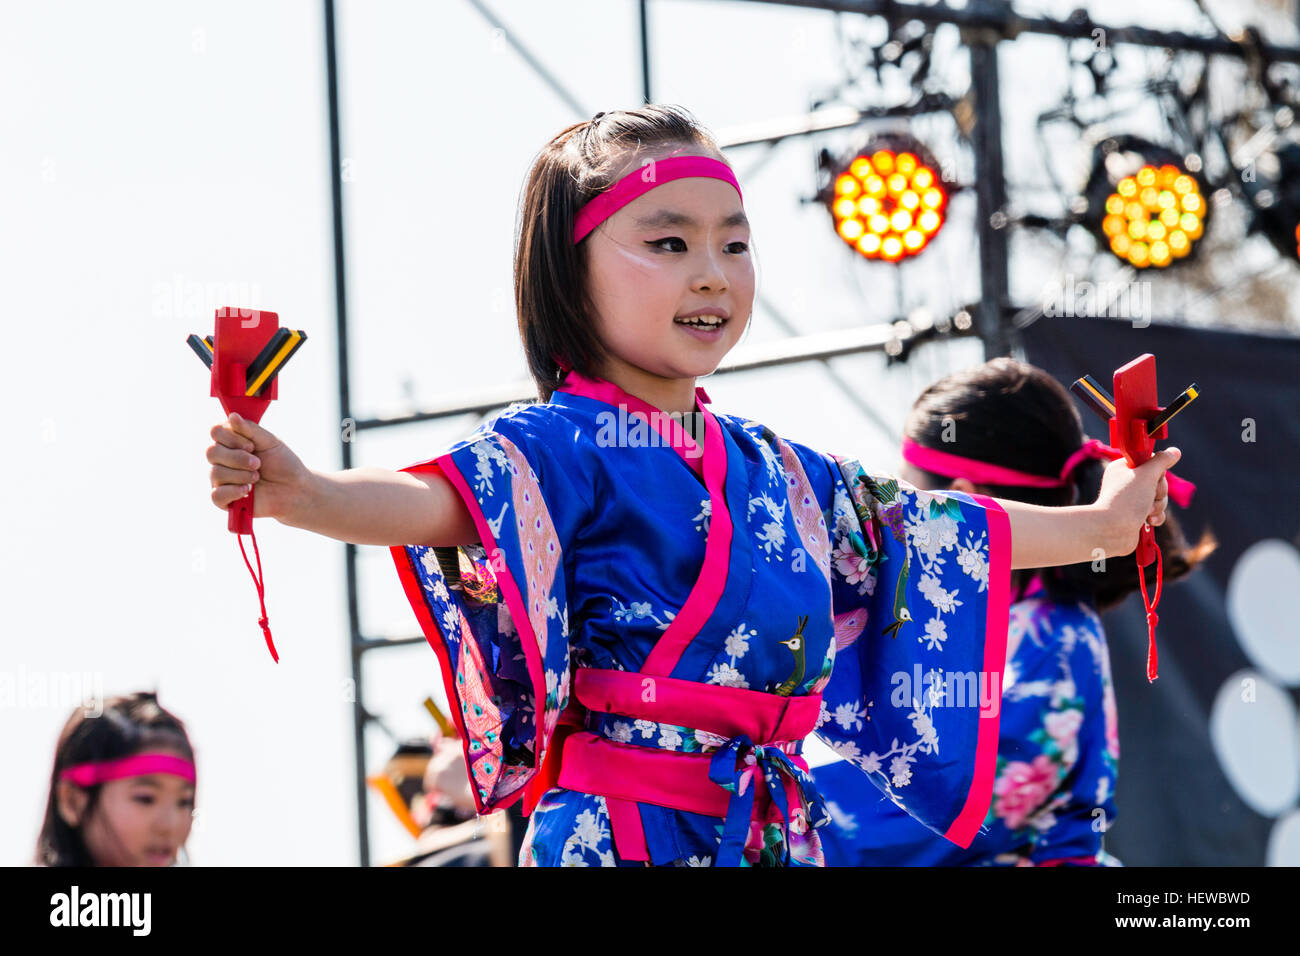 Japanese Yosakoi festival. Child, girl, dancing as part of team, wears traditional yukata jacket, holding naruko, wooden clappers, in each hand. Stock Photo